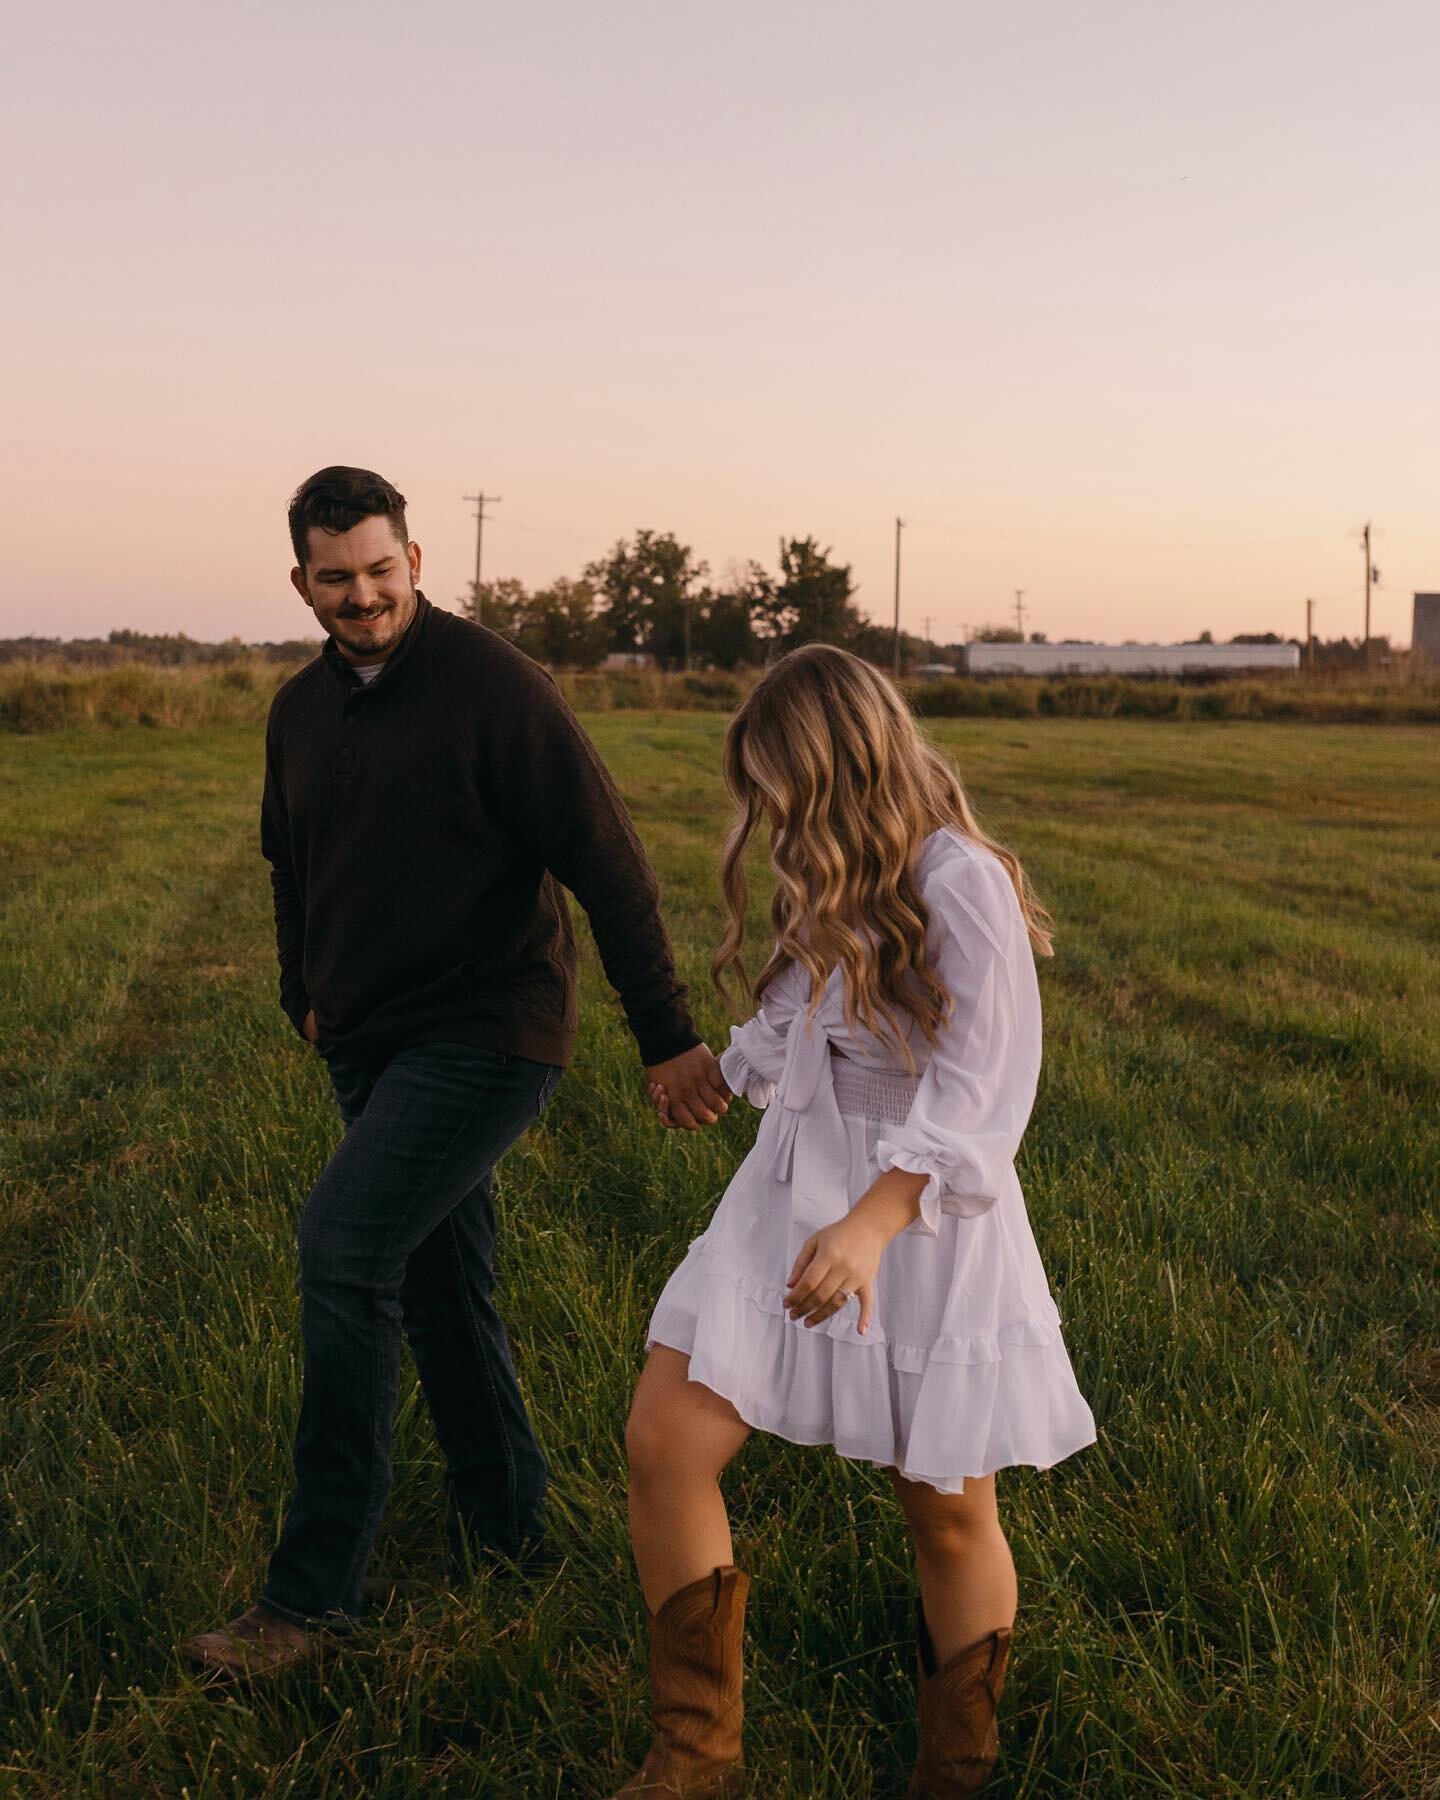 This engagement session was a mix of all things right. The perfect sunset and an even better couple. I cannot wait for their wedding next June! 💍

#engagementring #engagedaf #marincountywedding #bayareaweddingphotographer #bayareaphotographer #bayar